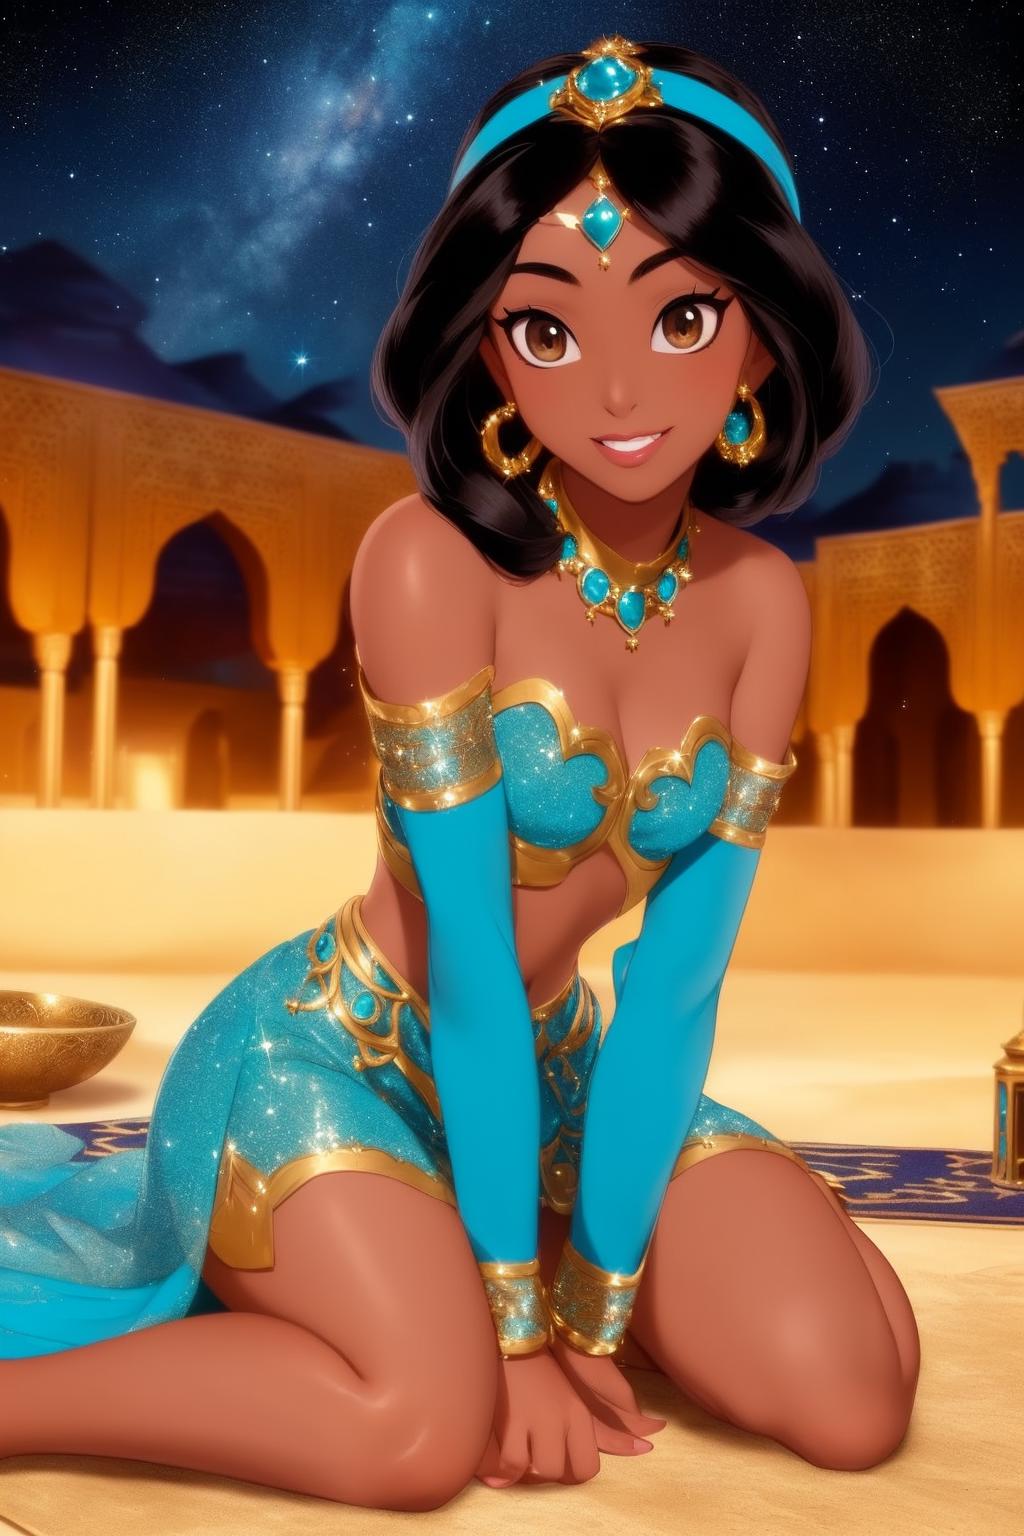 A beautifully drawn cartoon girl in a blue and gold outfit.